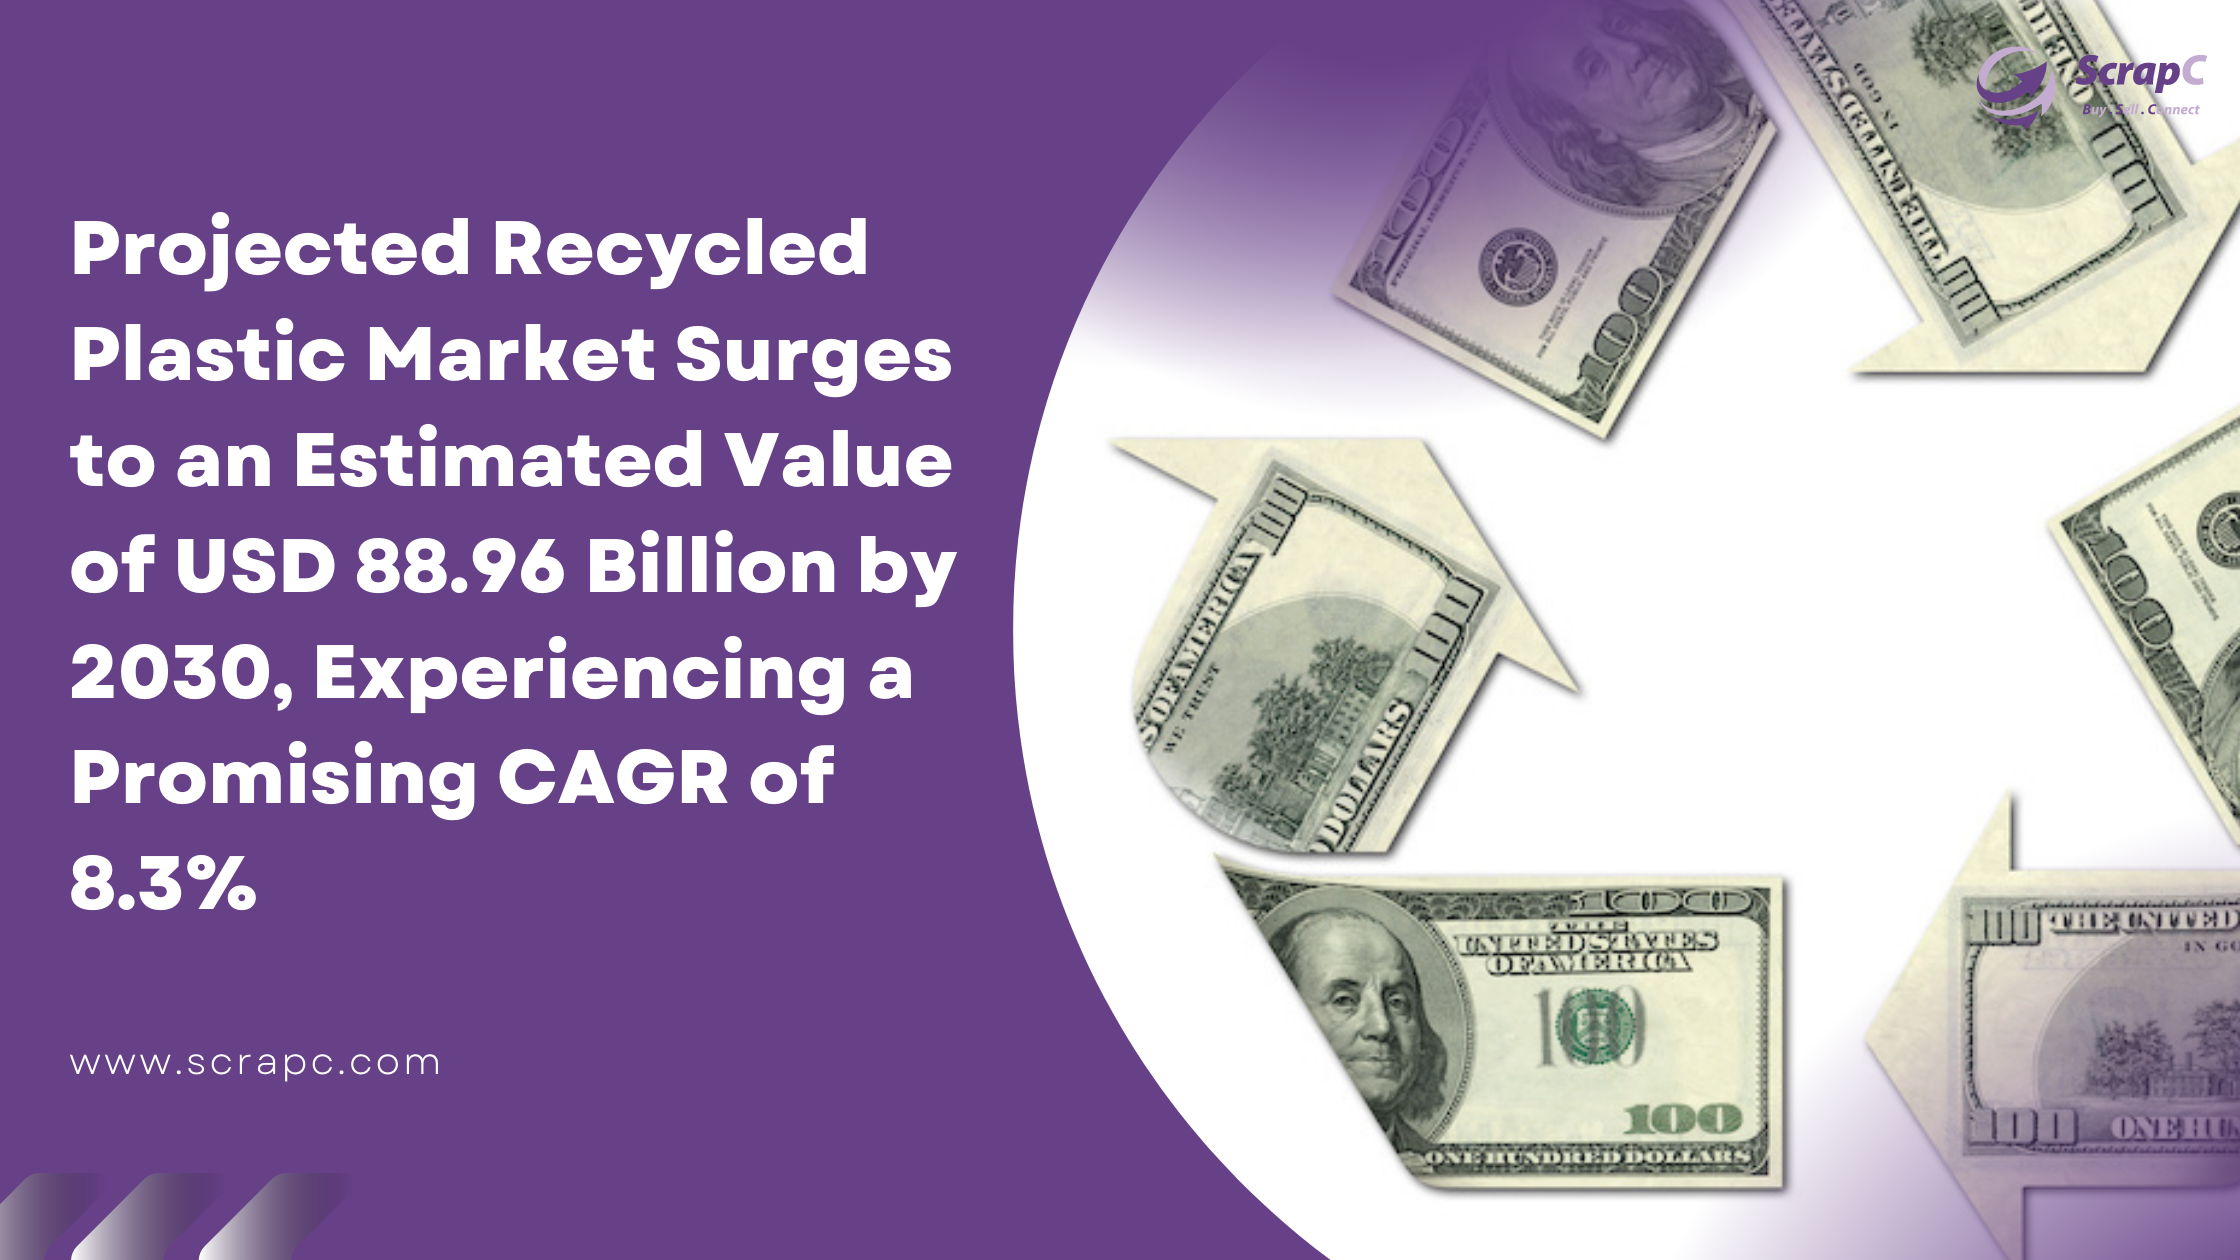 Projected Recycled Plastic Market Surges to an Estimated Value of USD 88.96 Billion by 2030, Experiencing a Promising CAGR of 8.3%